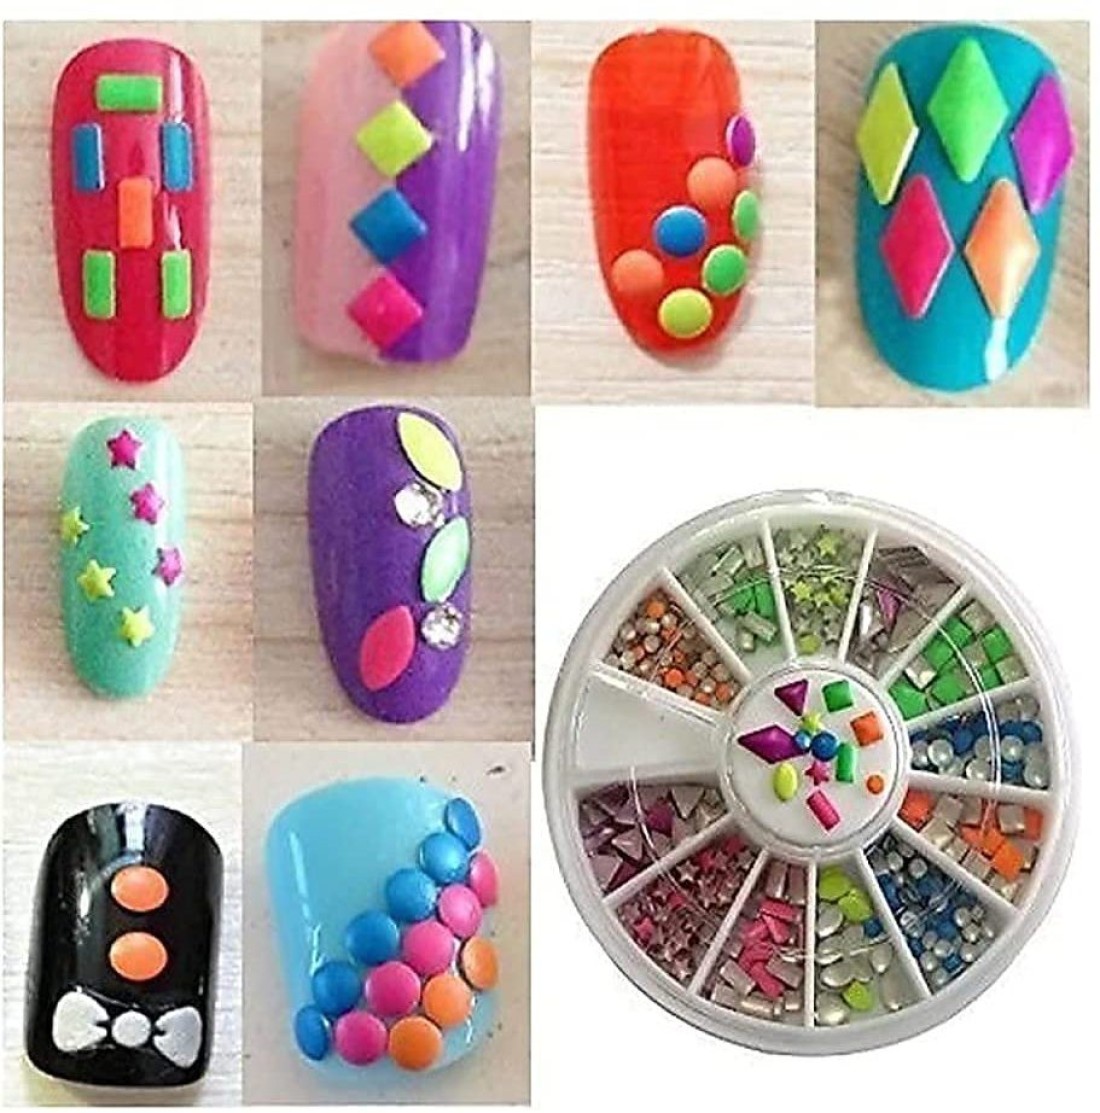 6) Nail Art Designs For Kids/For Short Nails - YouTube